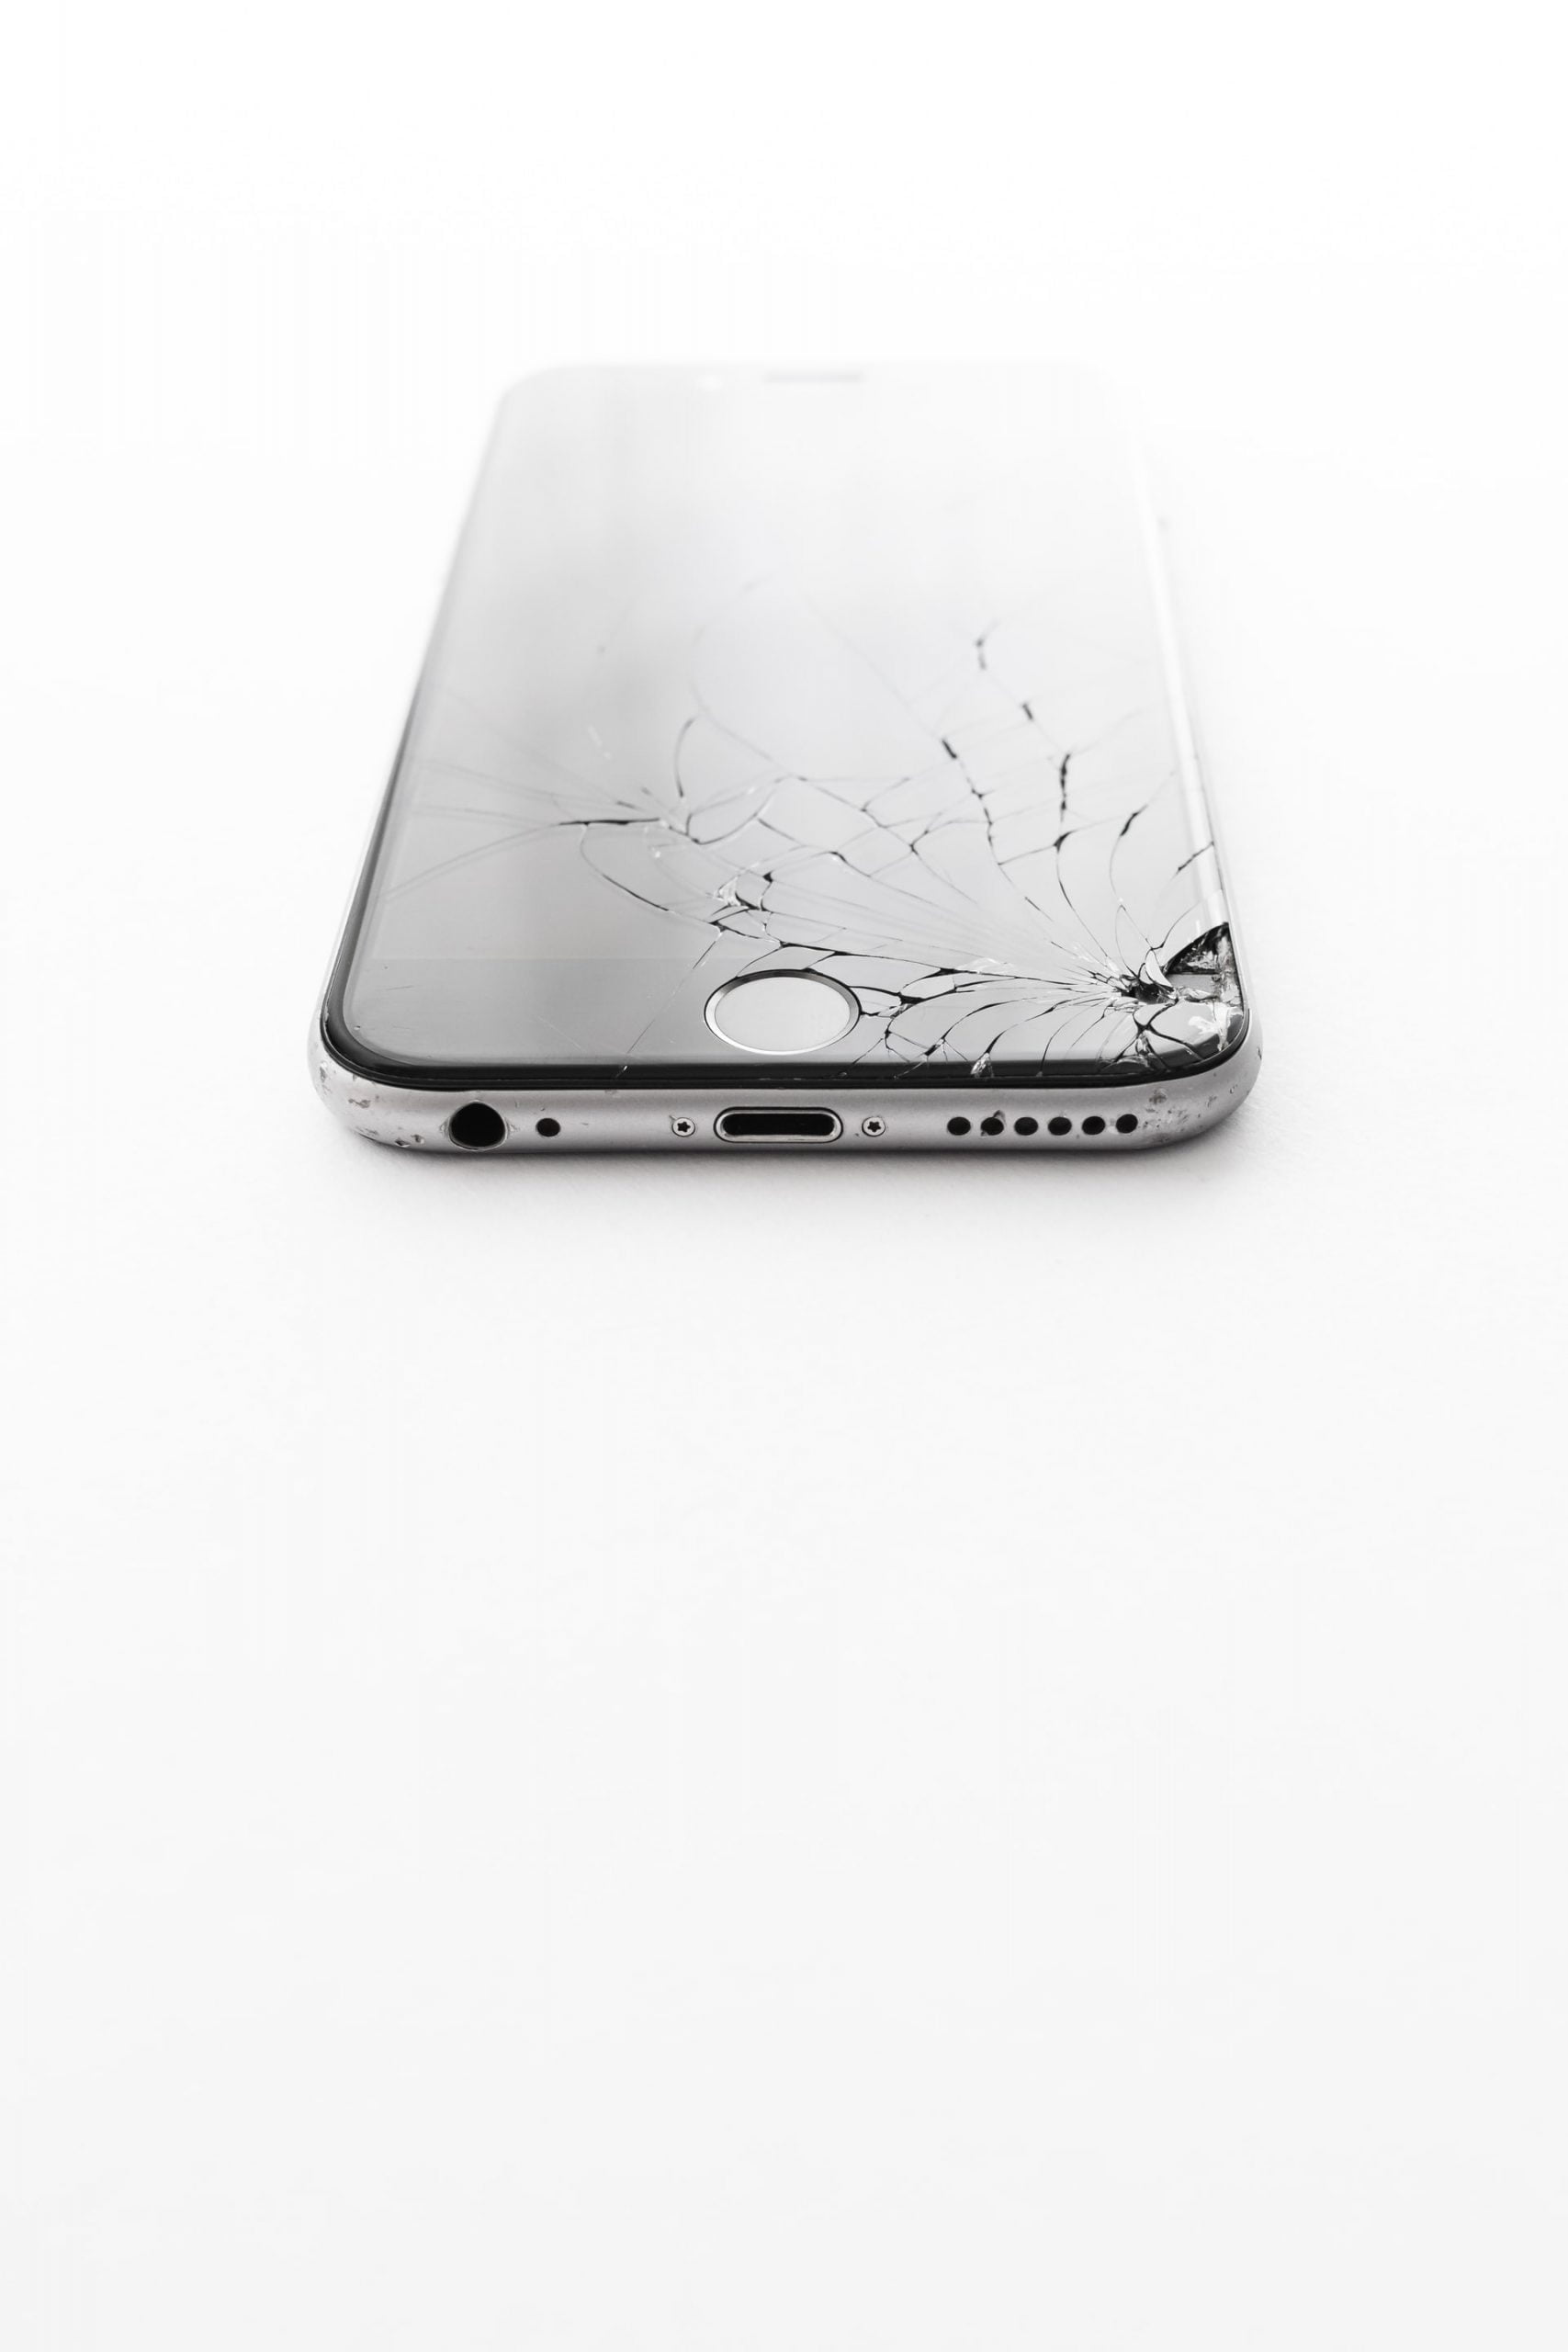 Right to repair: damaged phone